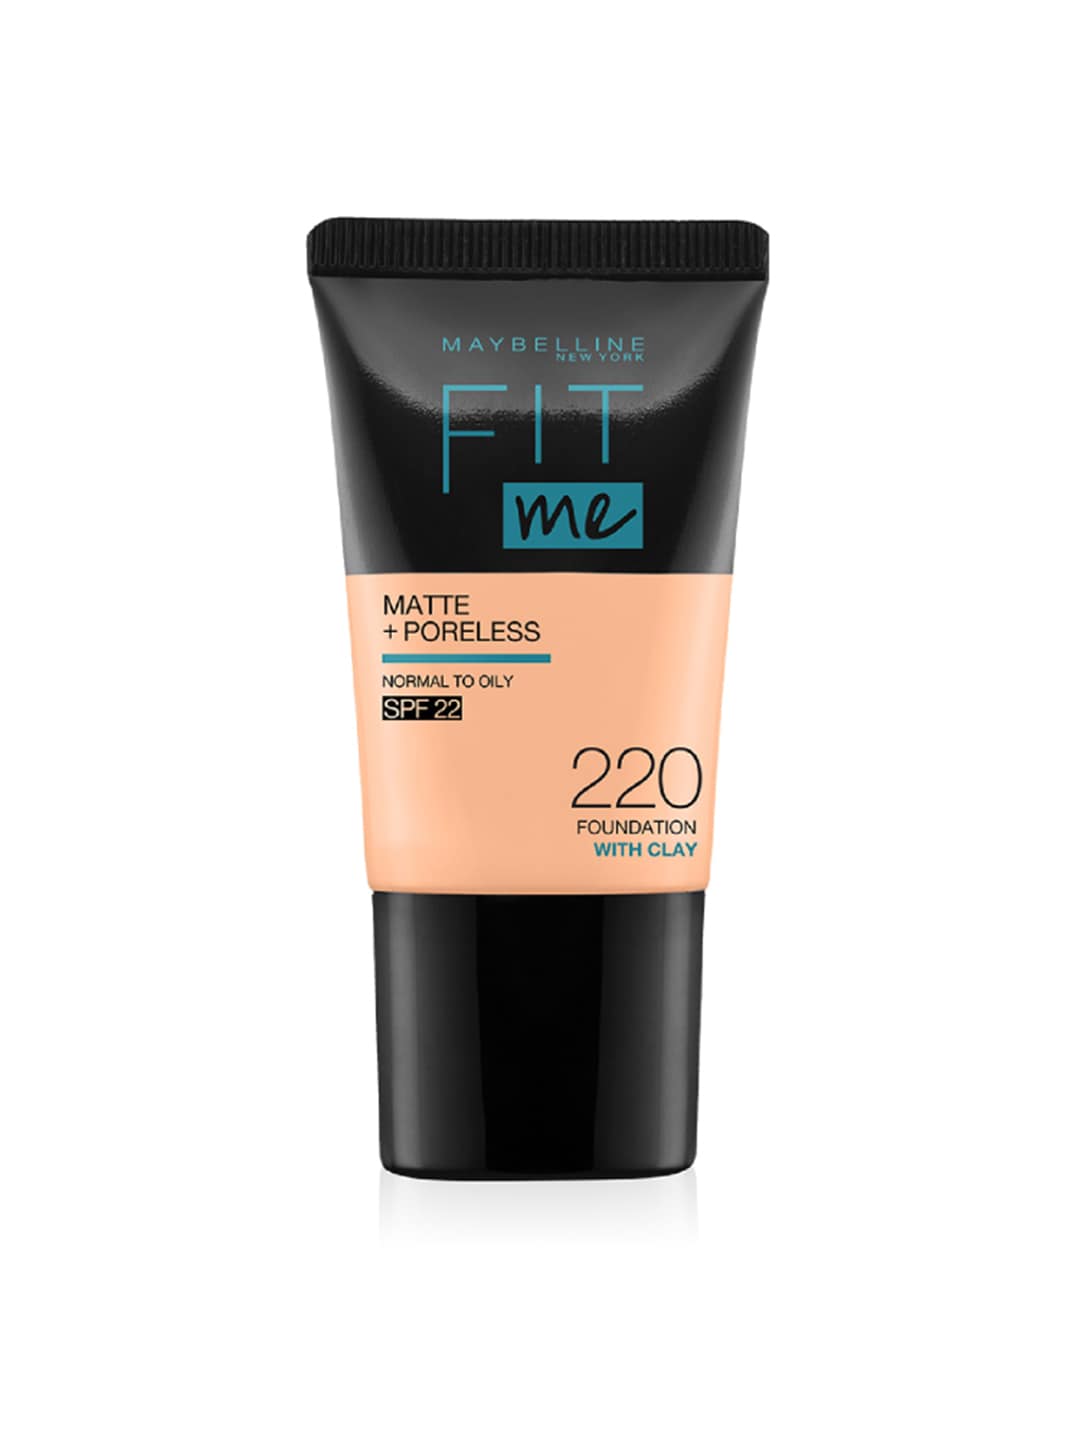 Maybelline New York Fit Me Matte+Poreless Liquid Foundation 18 ml - Natural Beige 220 Price in India